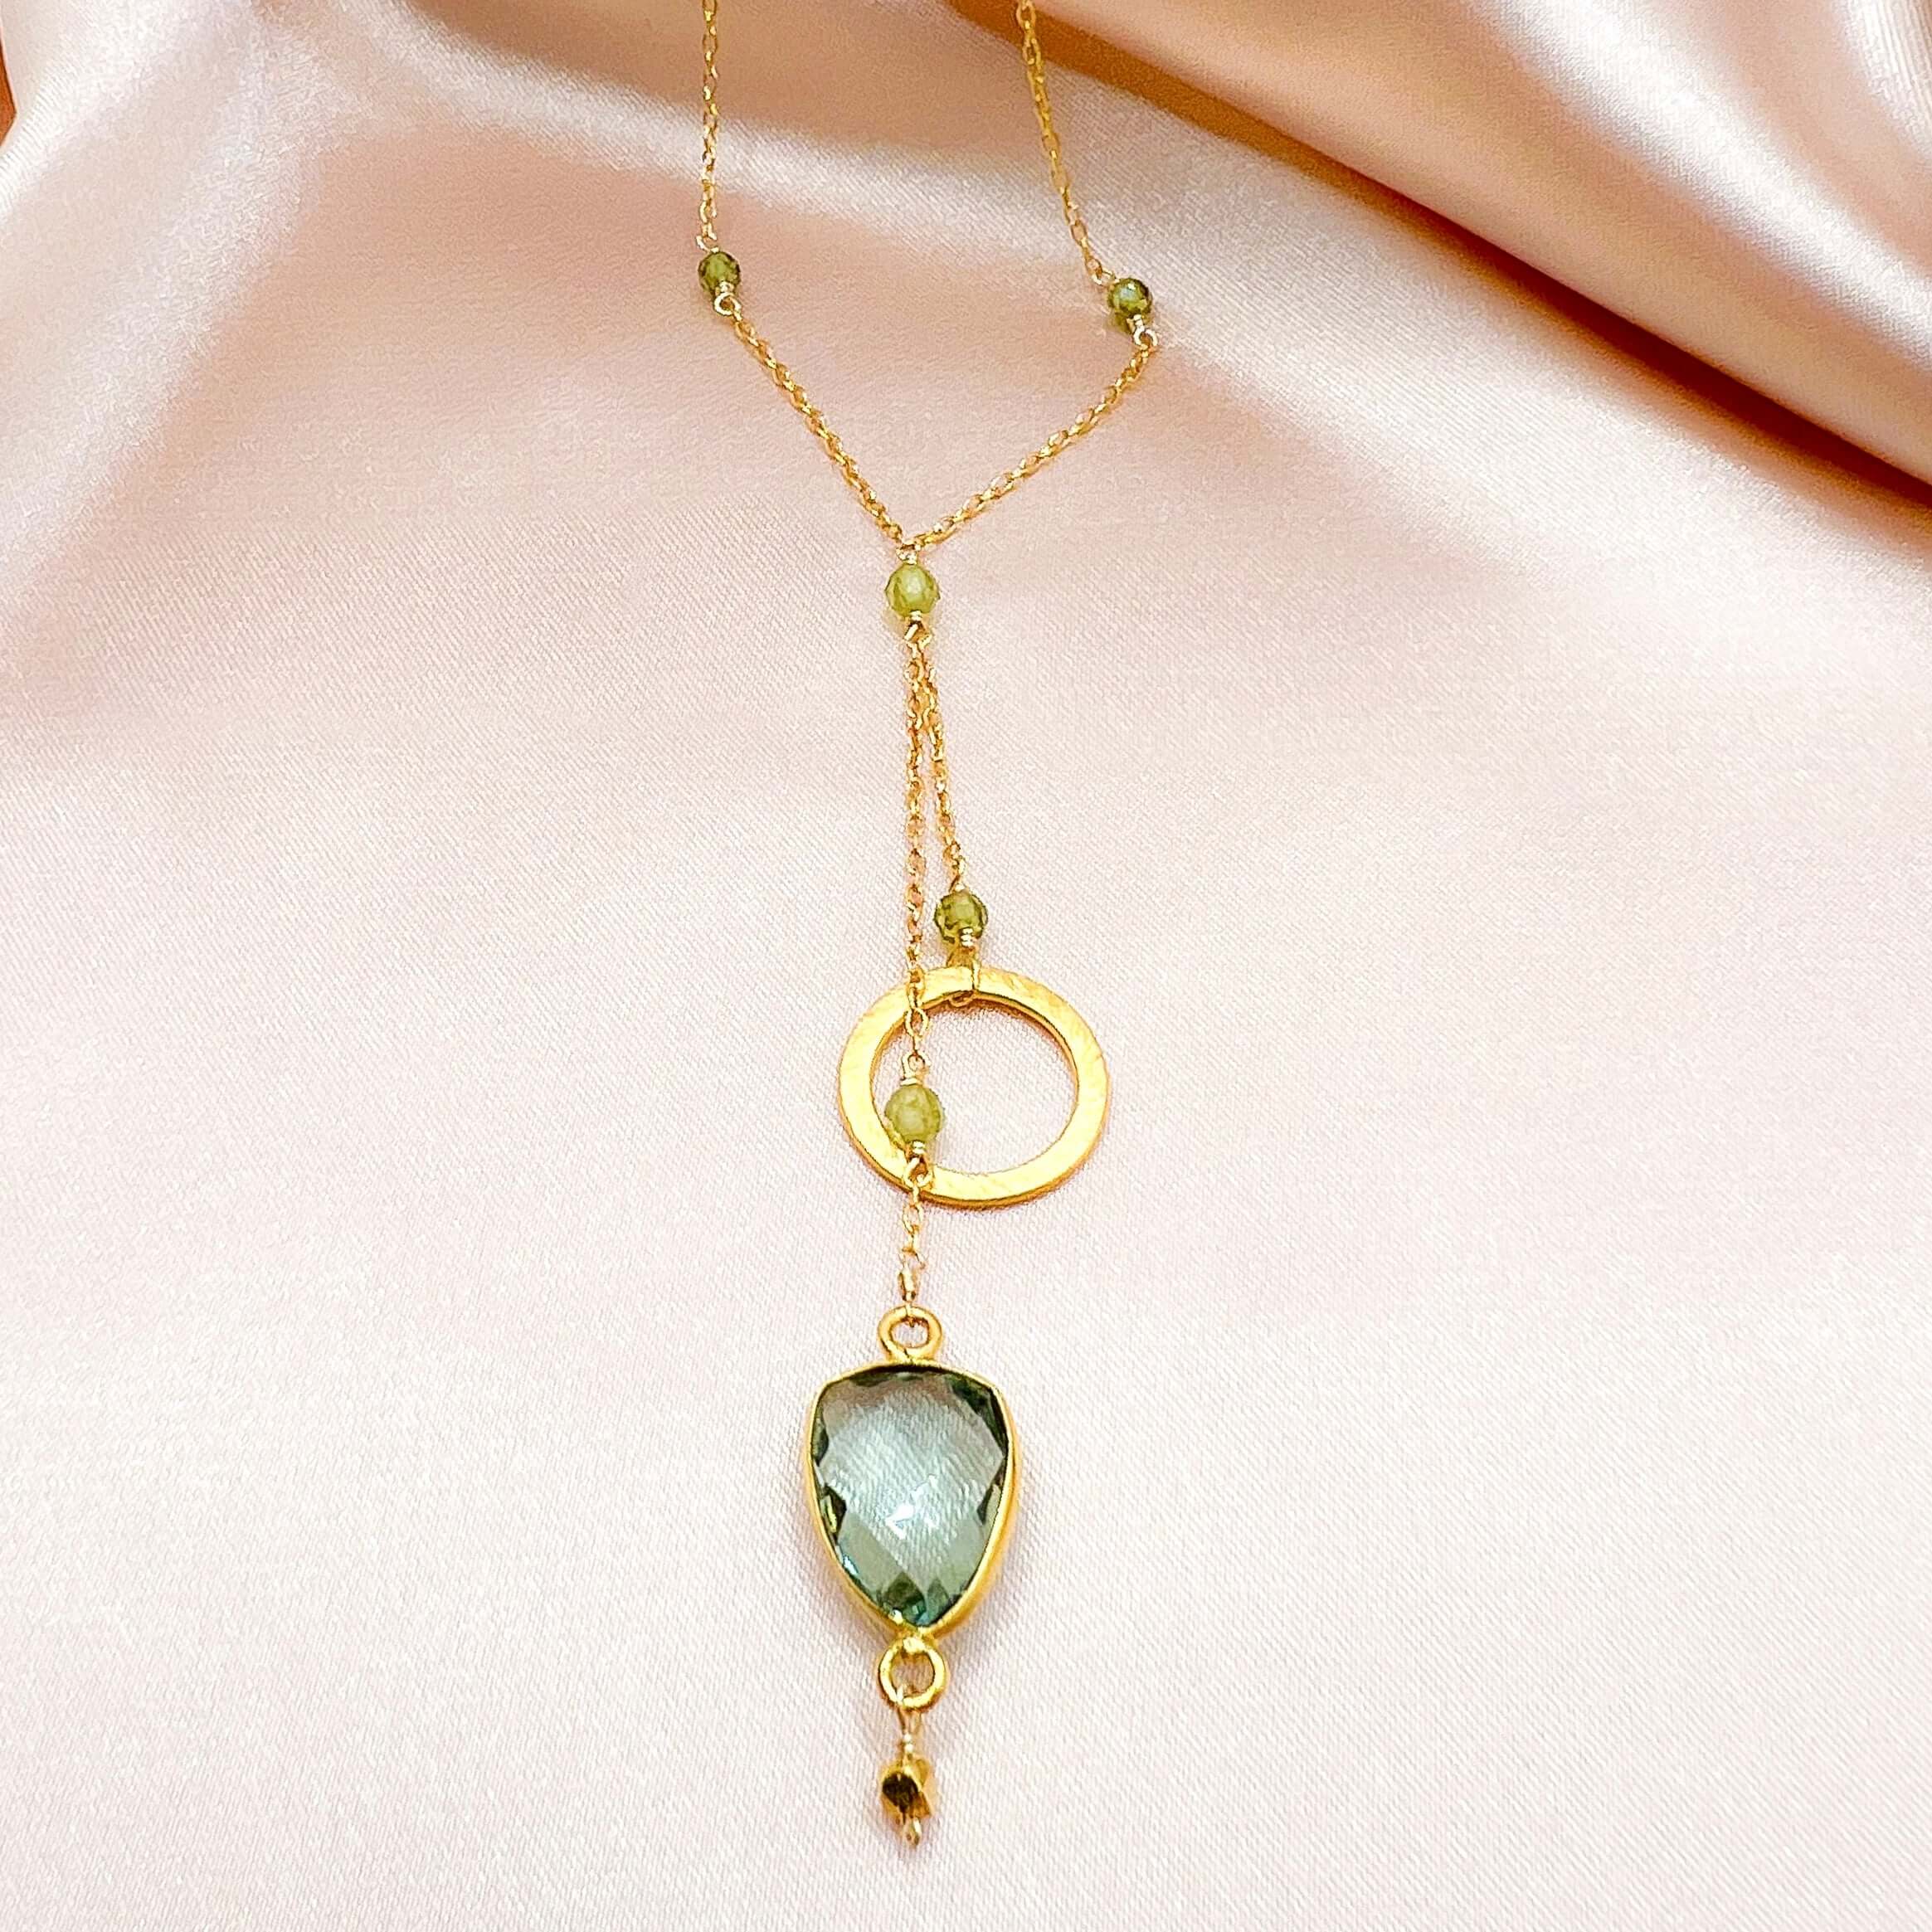 Graceful Green Amethyst Circle Necklace – 14k Gold Plated.